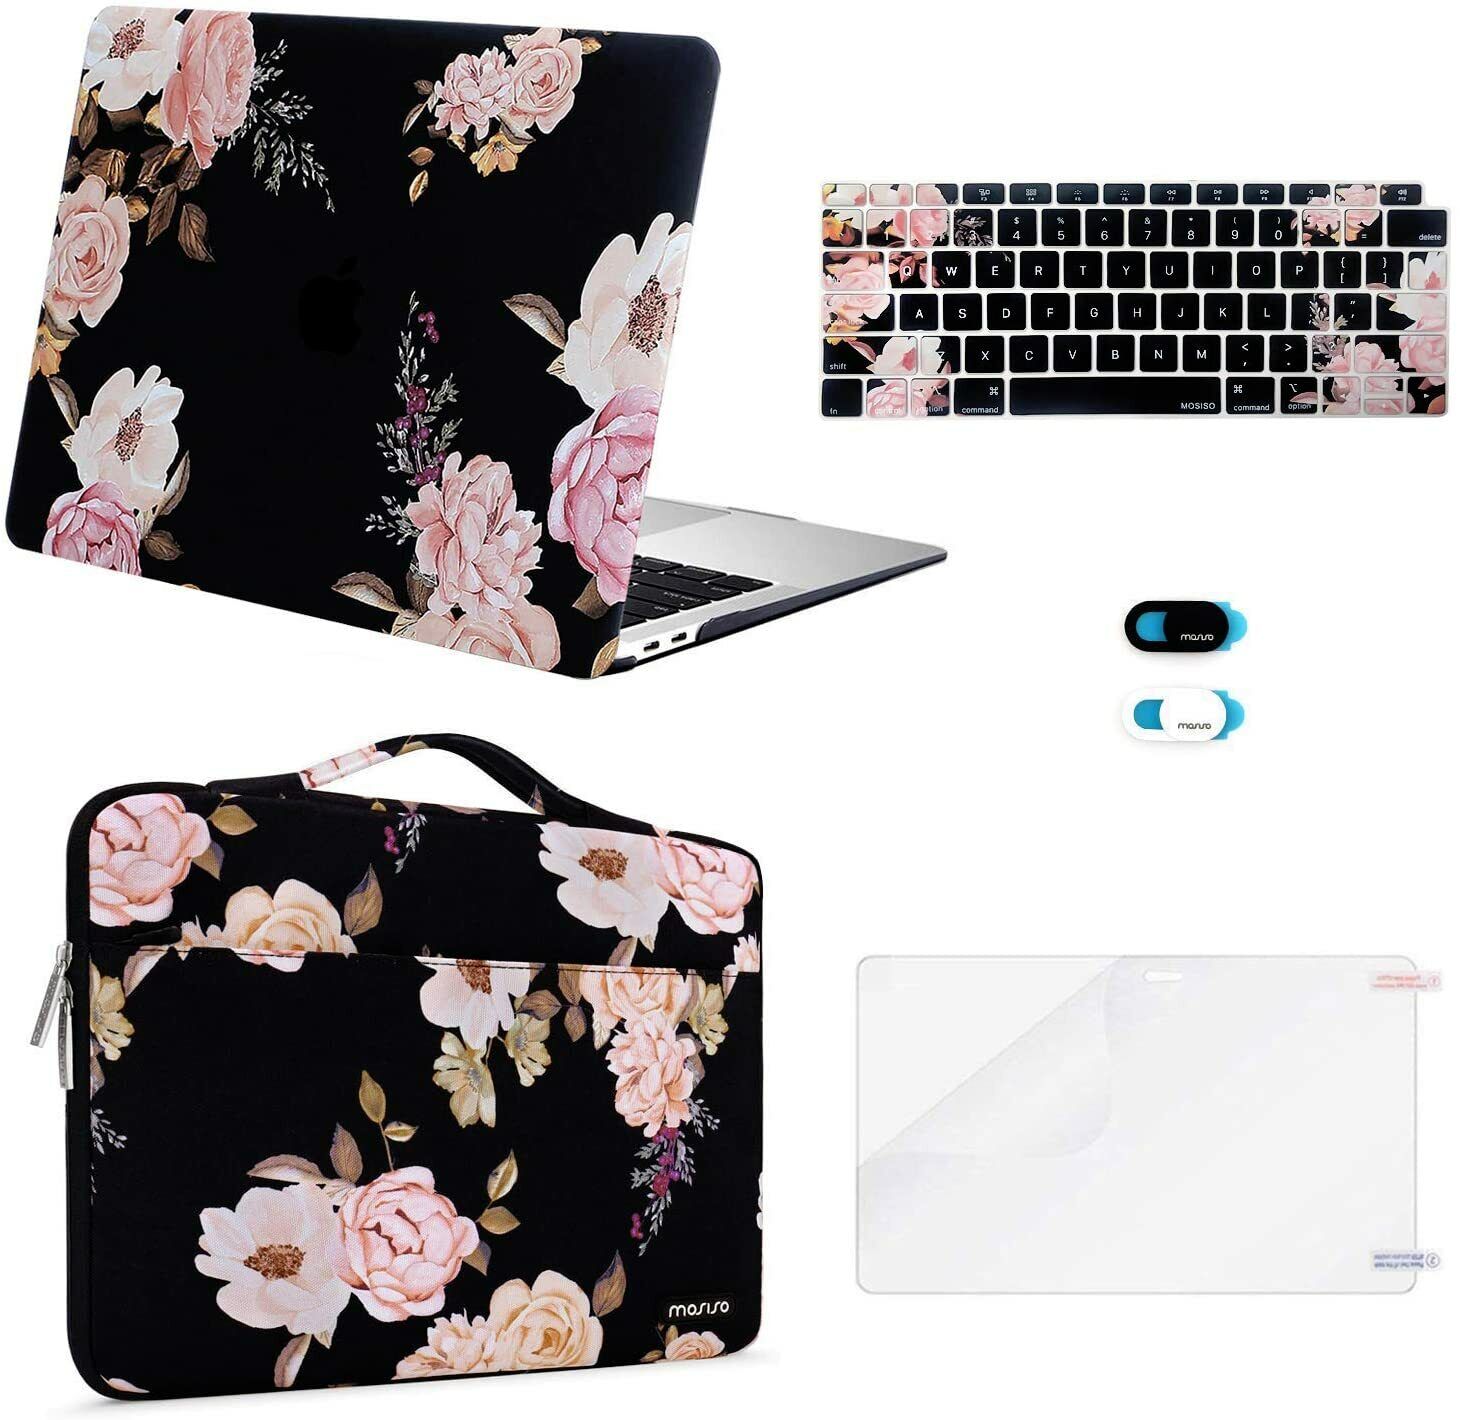 Mosis Plastic Hard Shell Case Pattern Sleeve Bag for Macbook Air 13 A1932 A2179